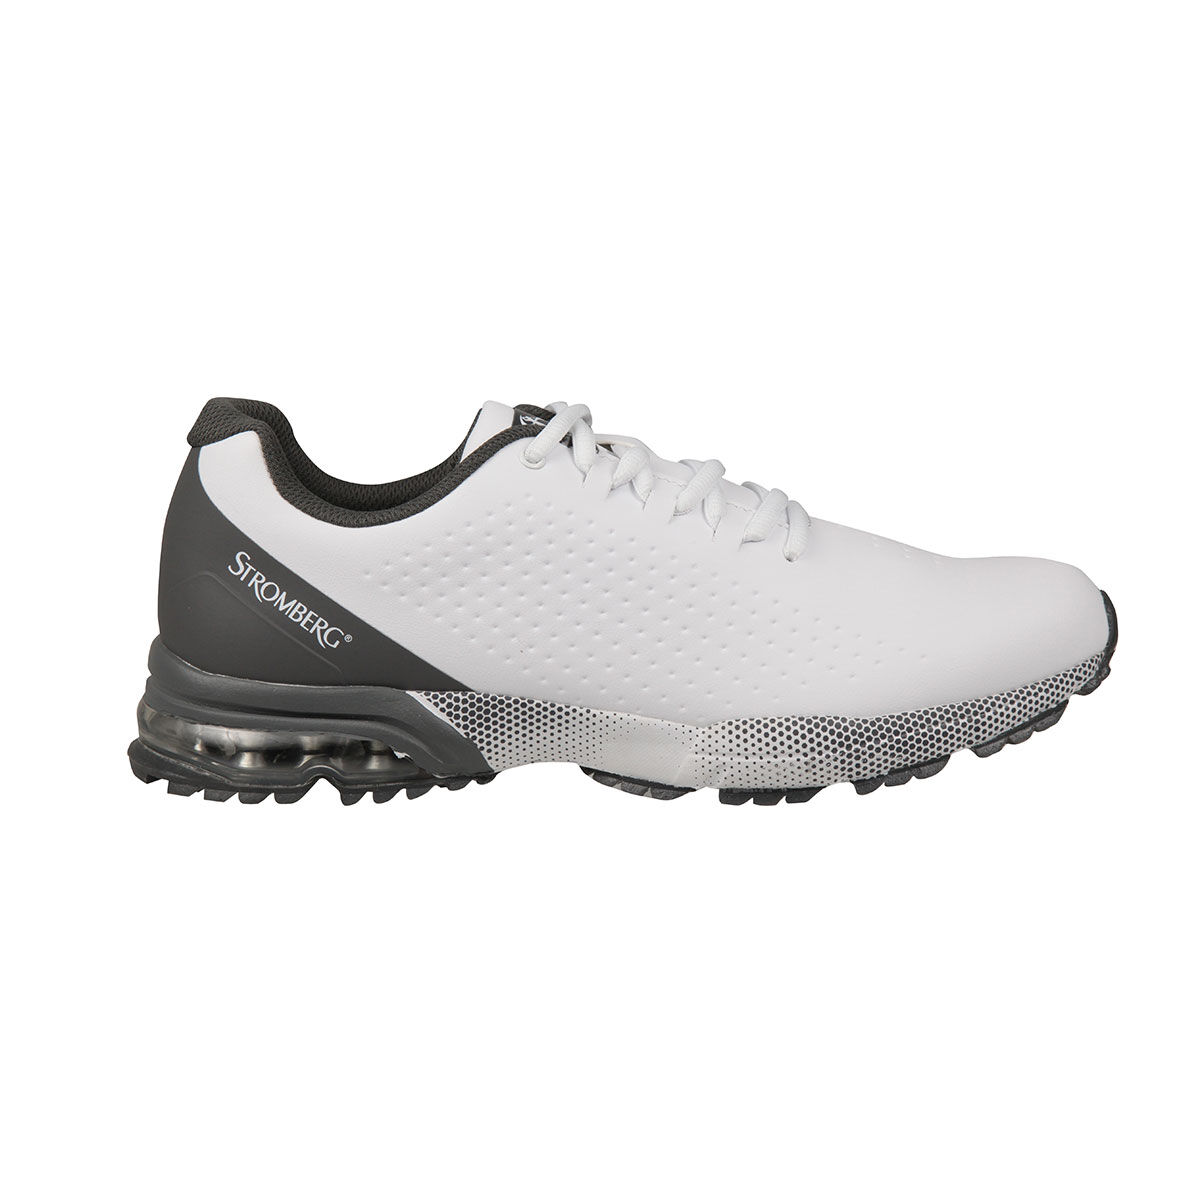 Stromberg Men's Ailsa Waterproof Spikeless Golf Shoes, Mens, White/grey, 7 | American Golf - Father's Day Gift von Stromberg